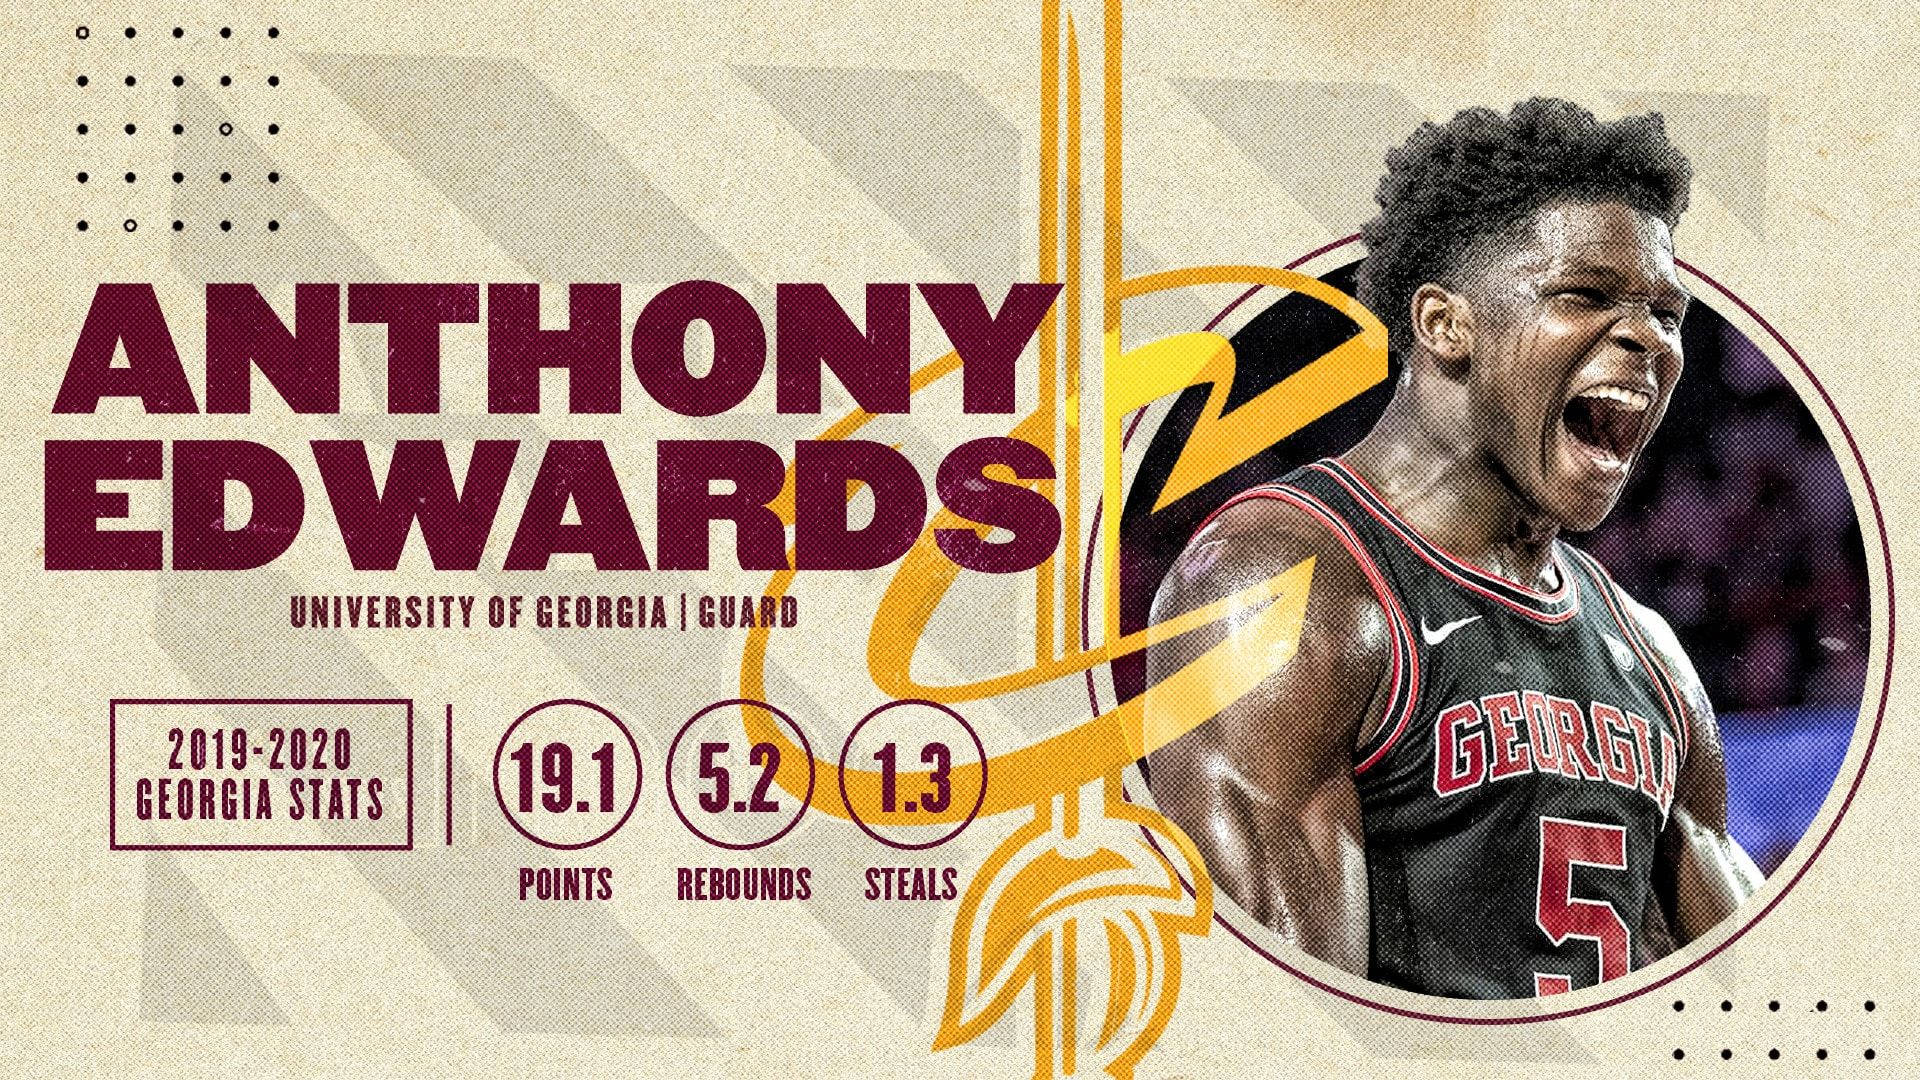 Anthony Edwards College Basketball Profile Wallpaper